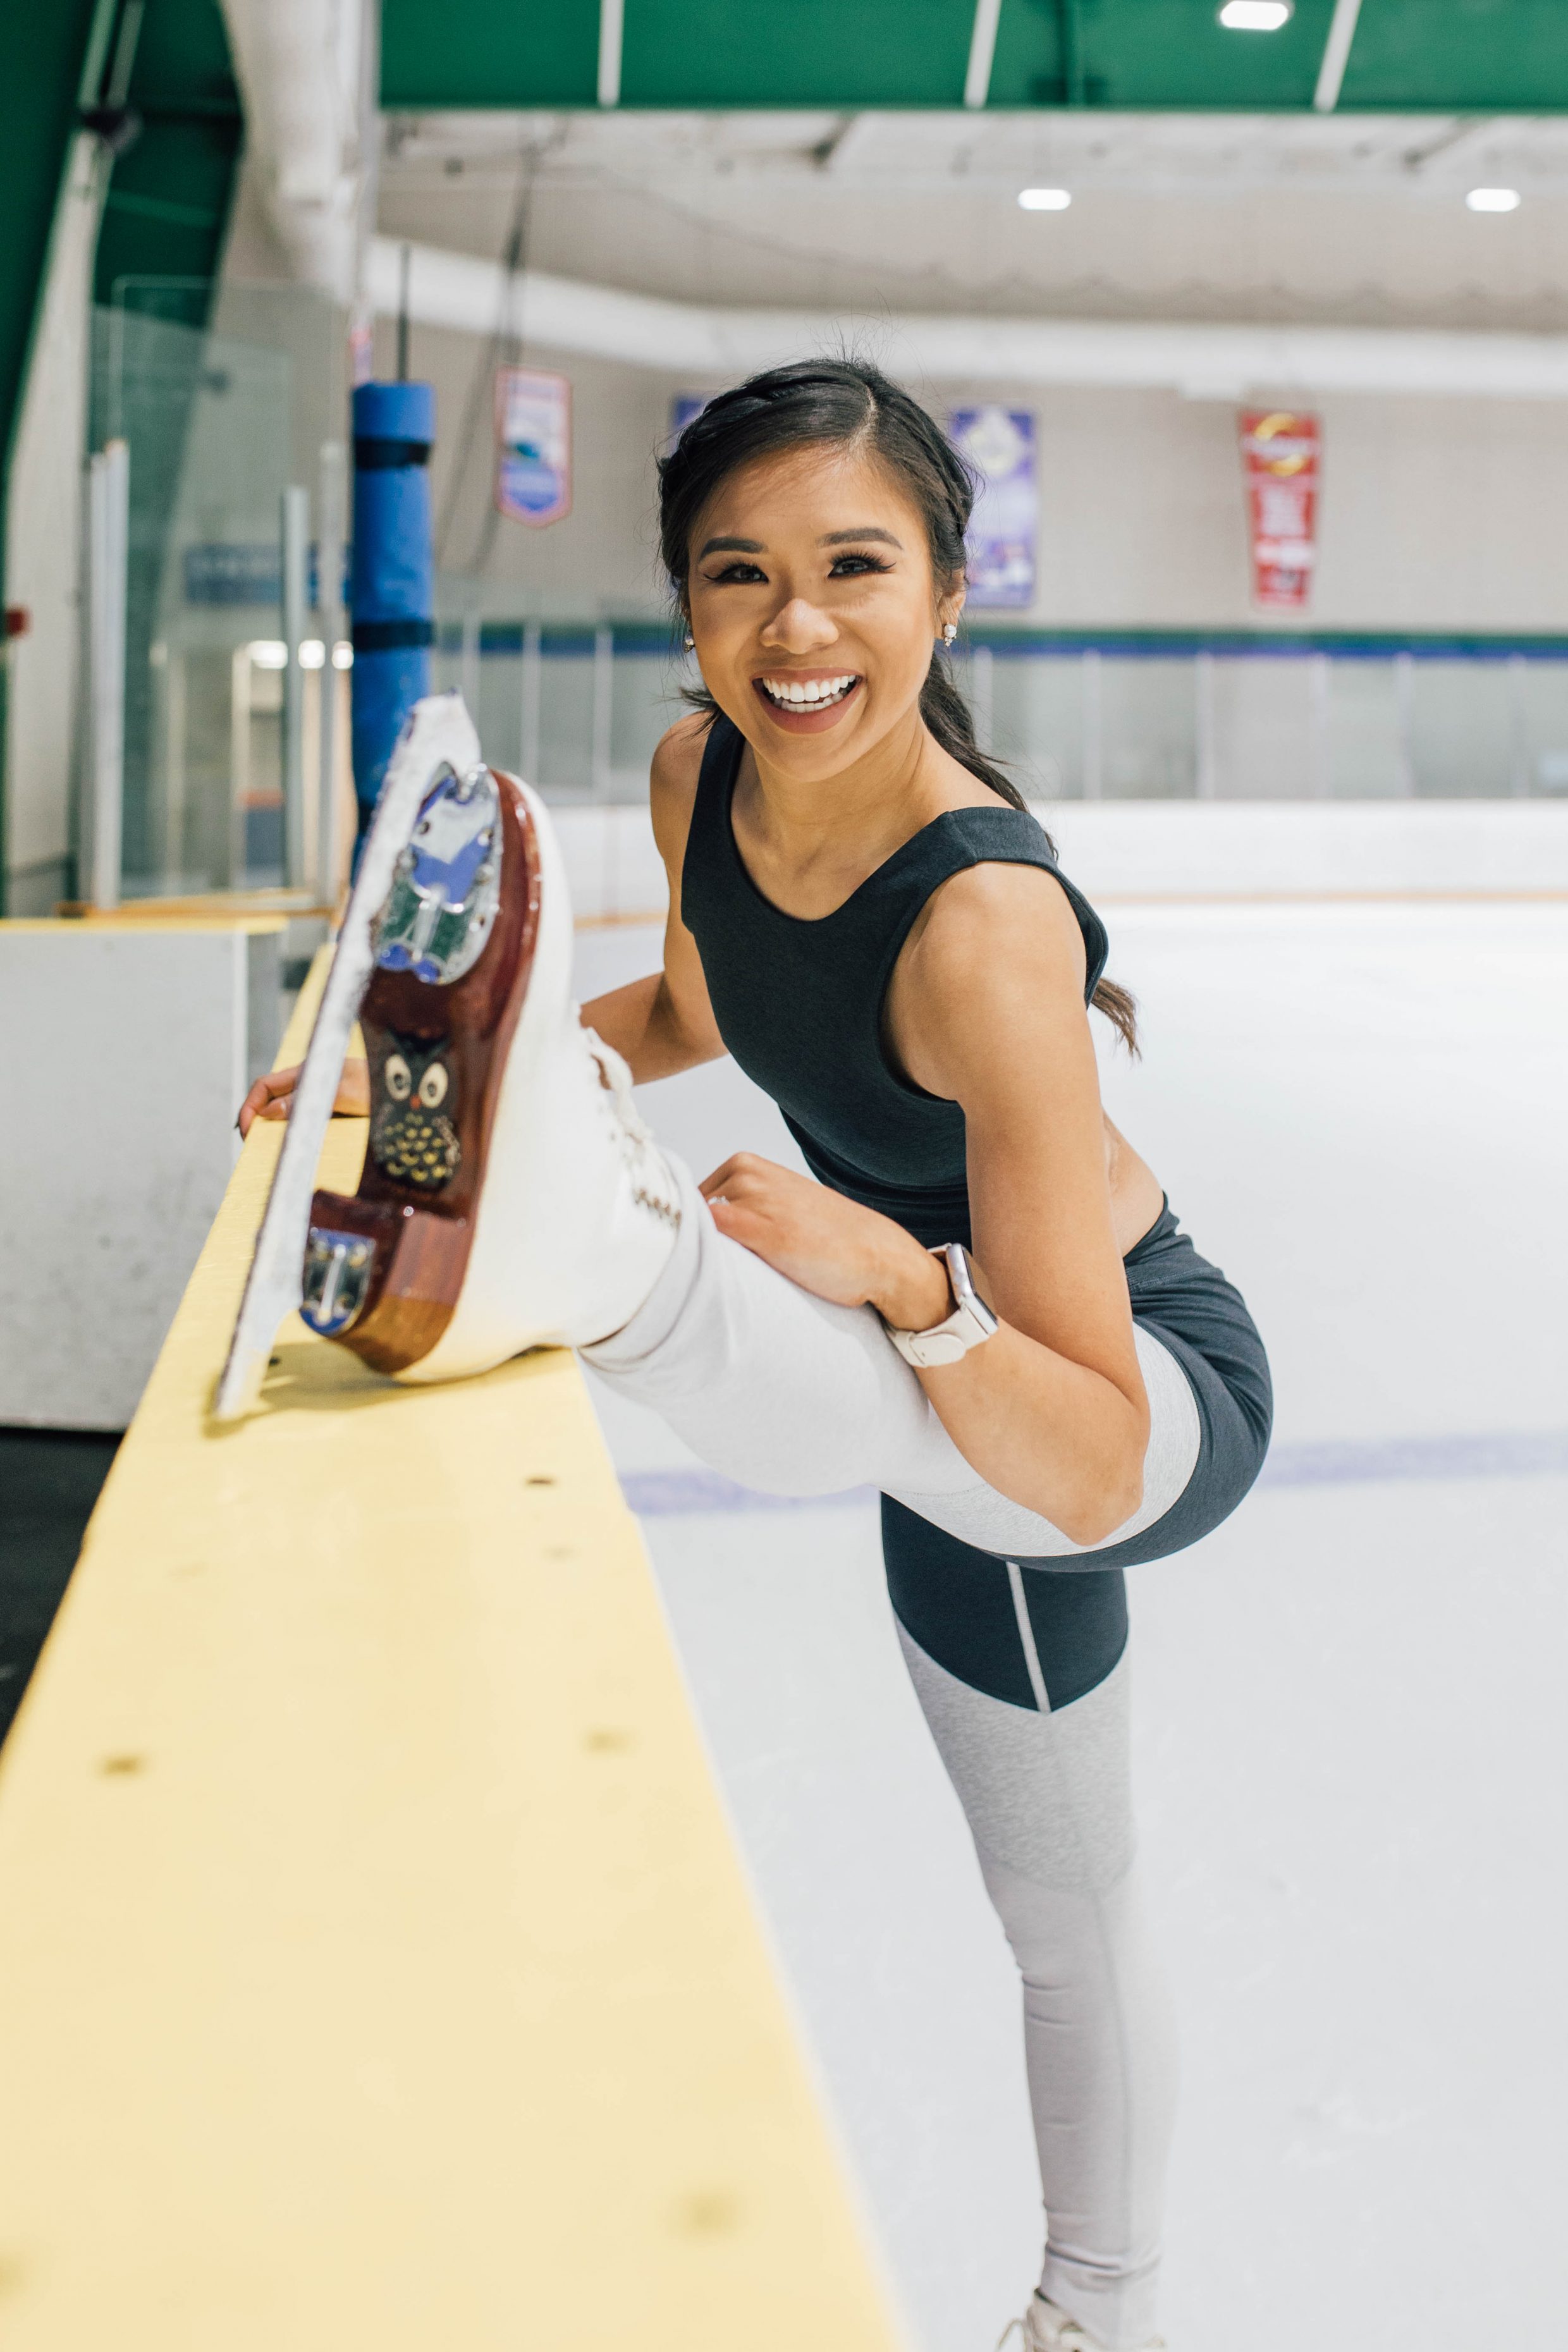 Hoang-Kim stretches by the board at Chilled Ponds Ice RInk in Outdoor Voices apparel